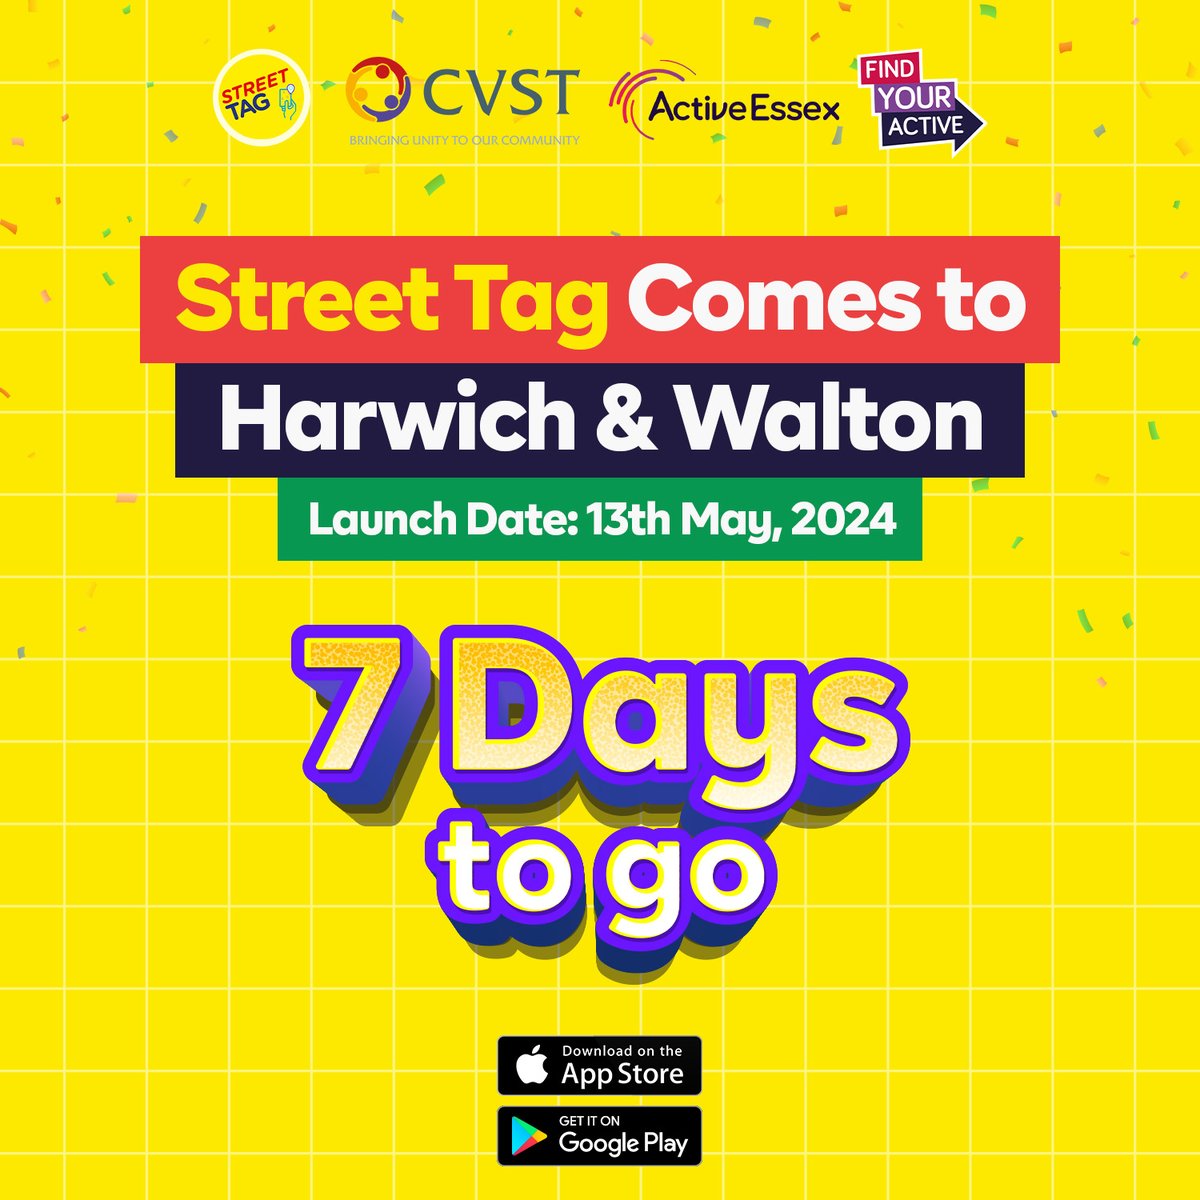 Street Tag is in Harwich & Walton! Walk, run, cycle, scoot to stay active, collect points and win prizes! The Community Leaderboard season starts on the 13th of May, 2024, so don't wait—download the app and dive into the action TODAY! @cvstendring @activeessex